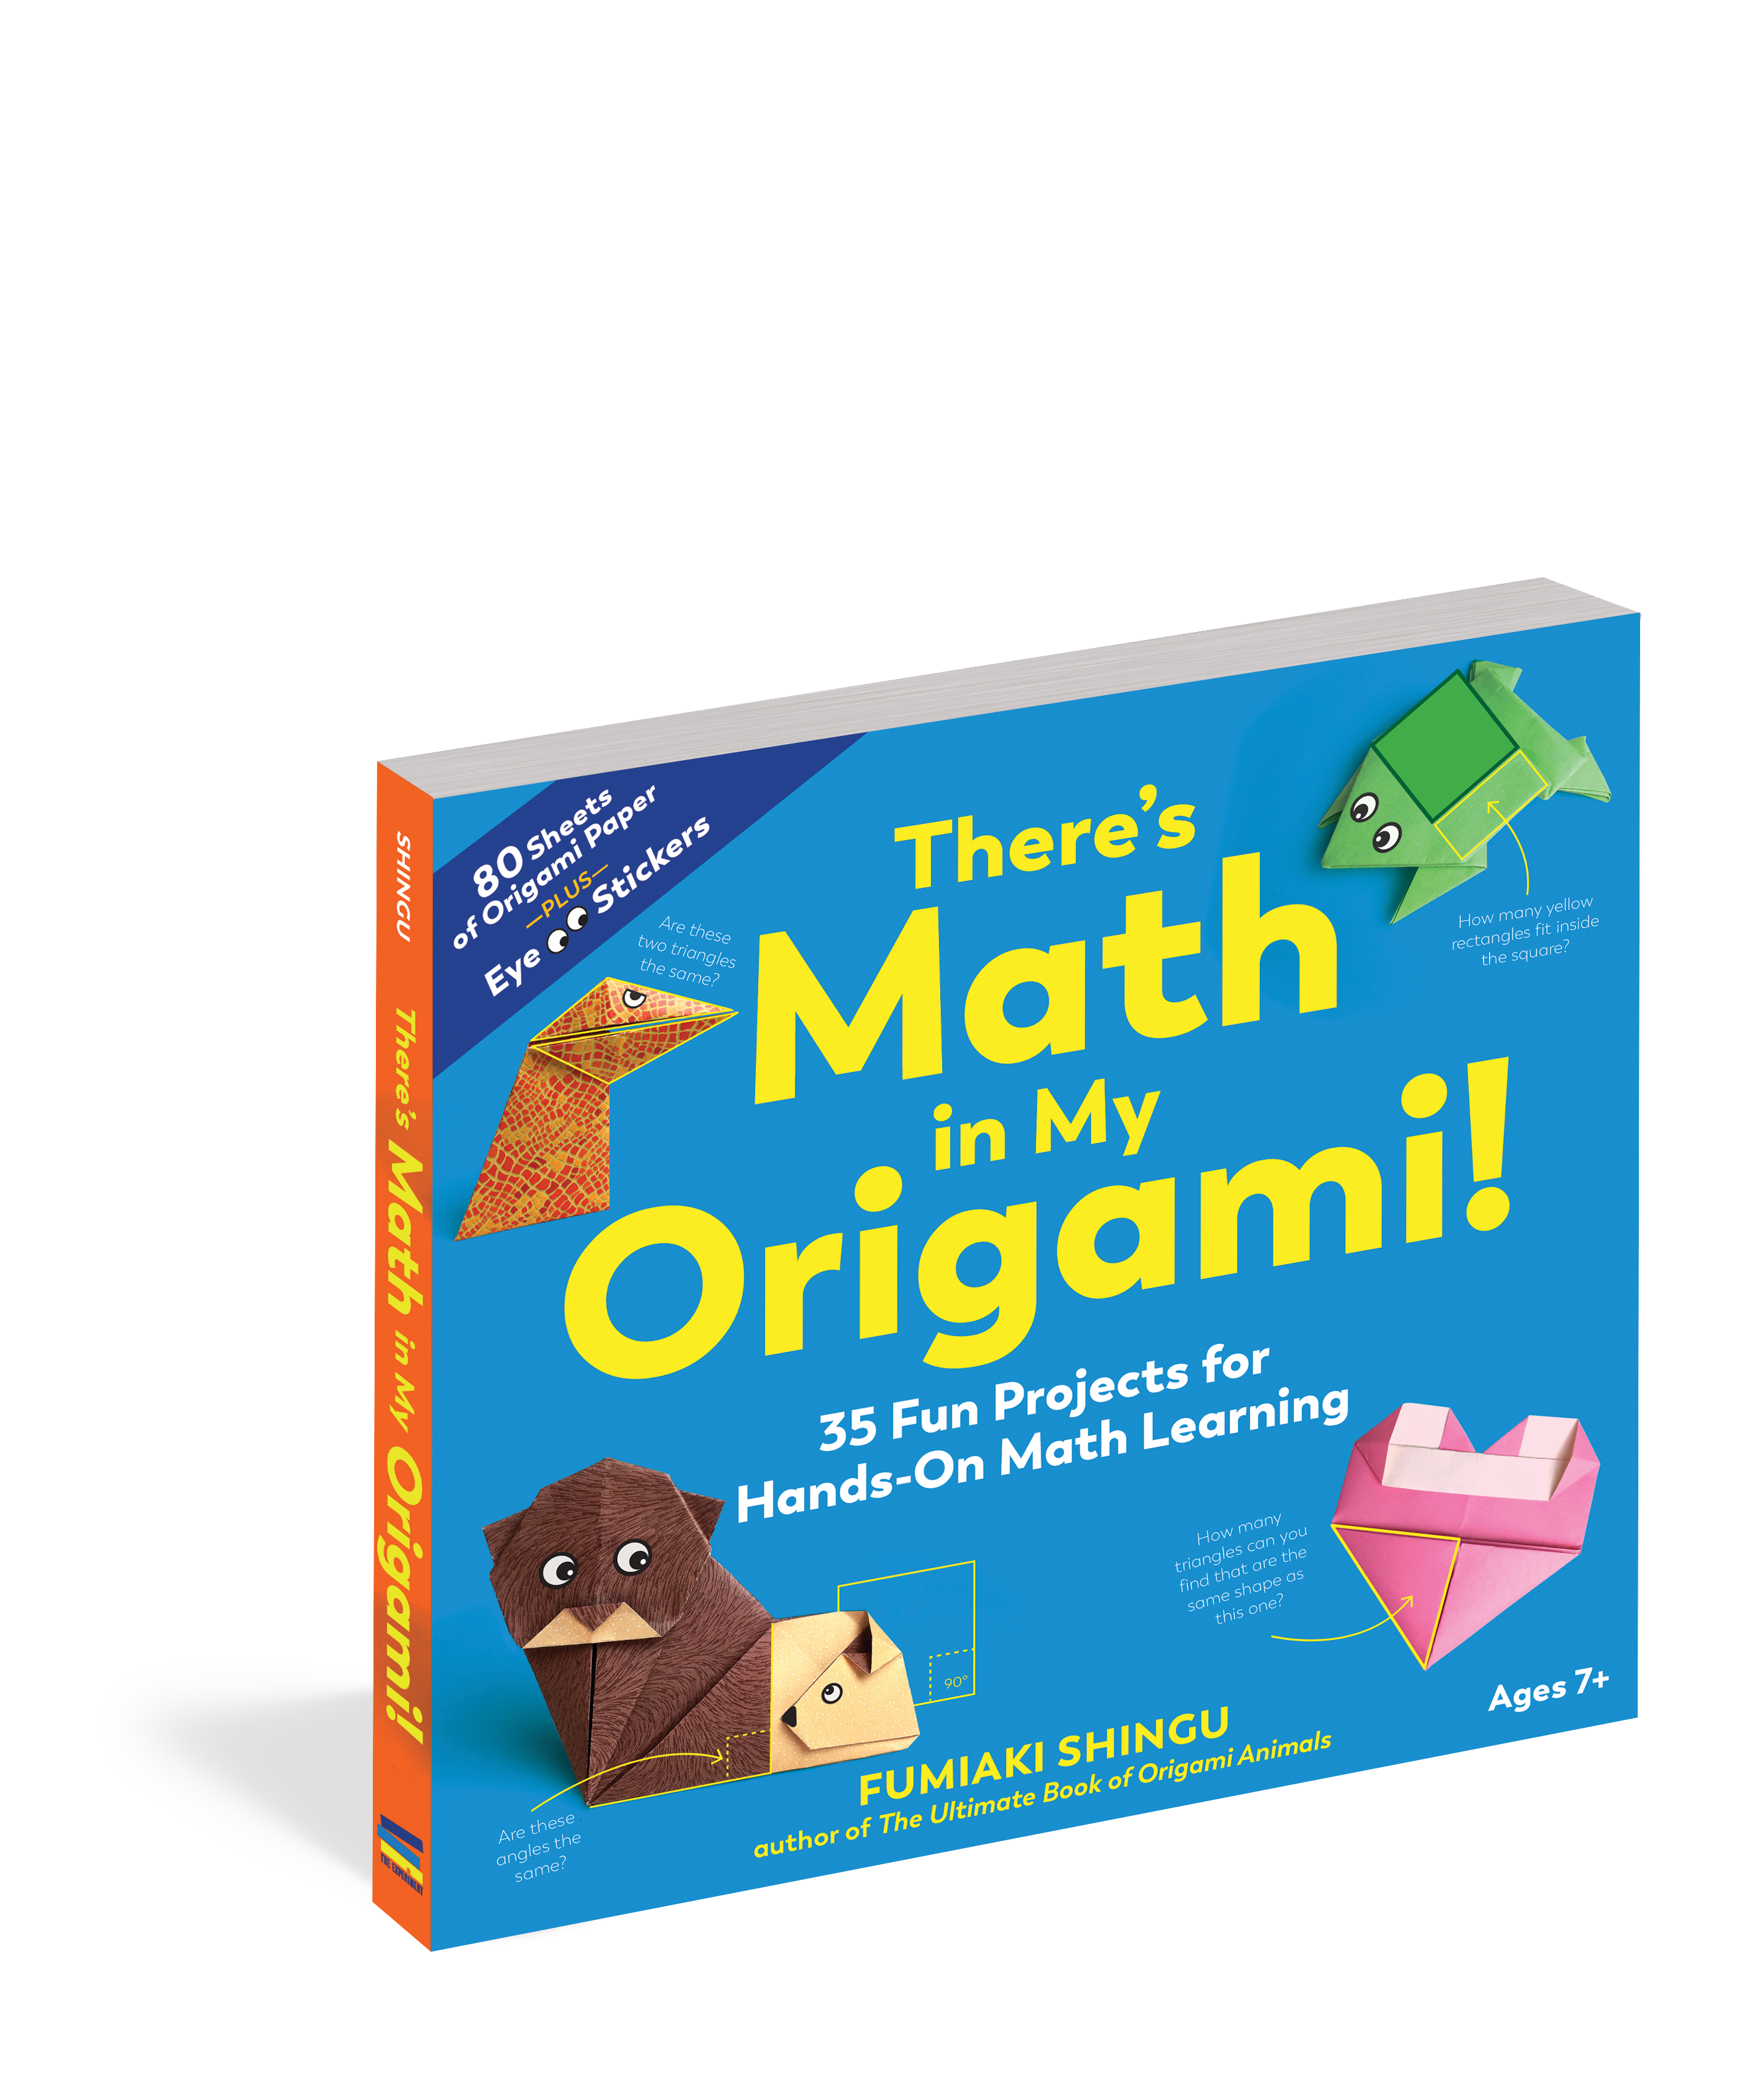 There's Math in my Origami!